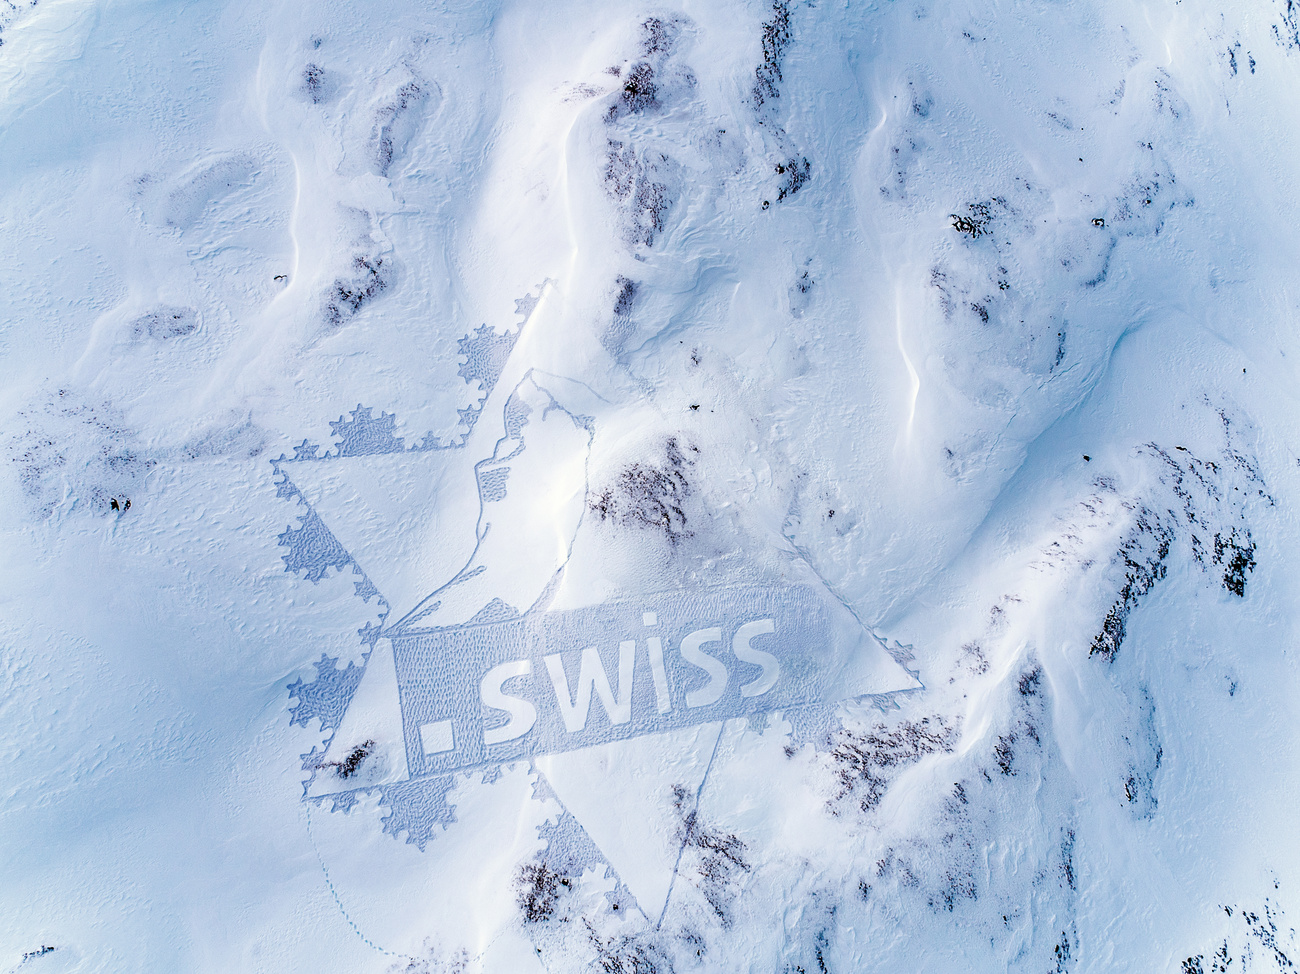 Swiss domains expand: private individuals now eligible for '.swiss' URLs